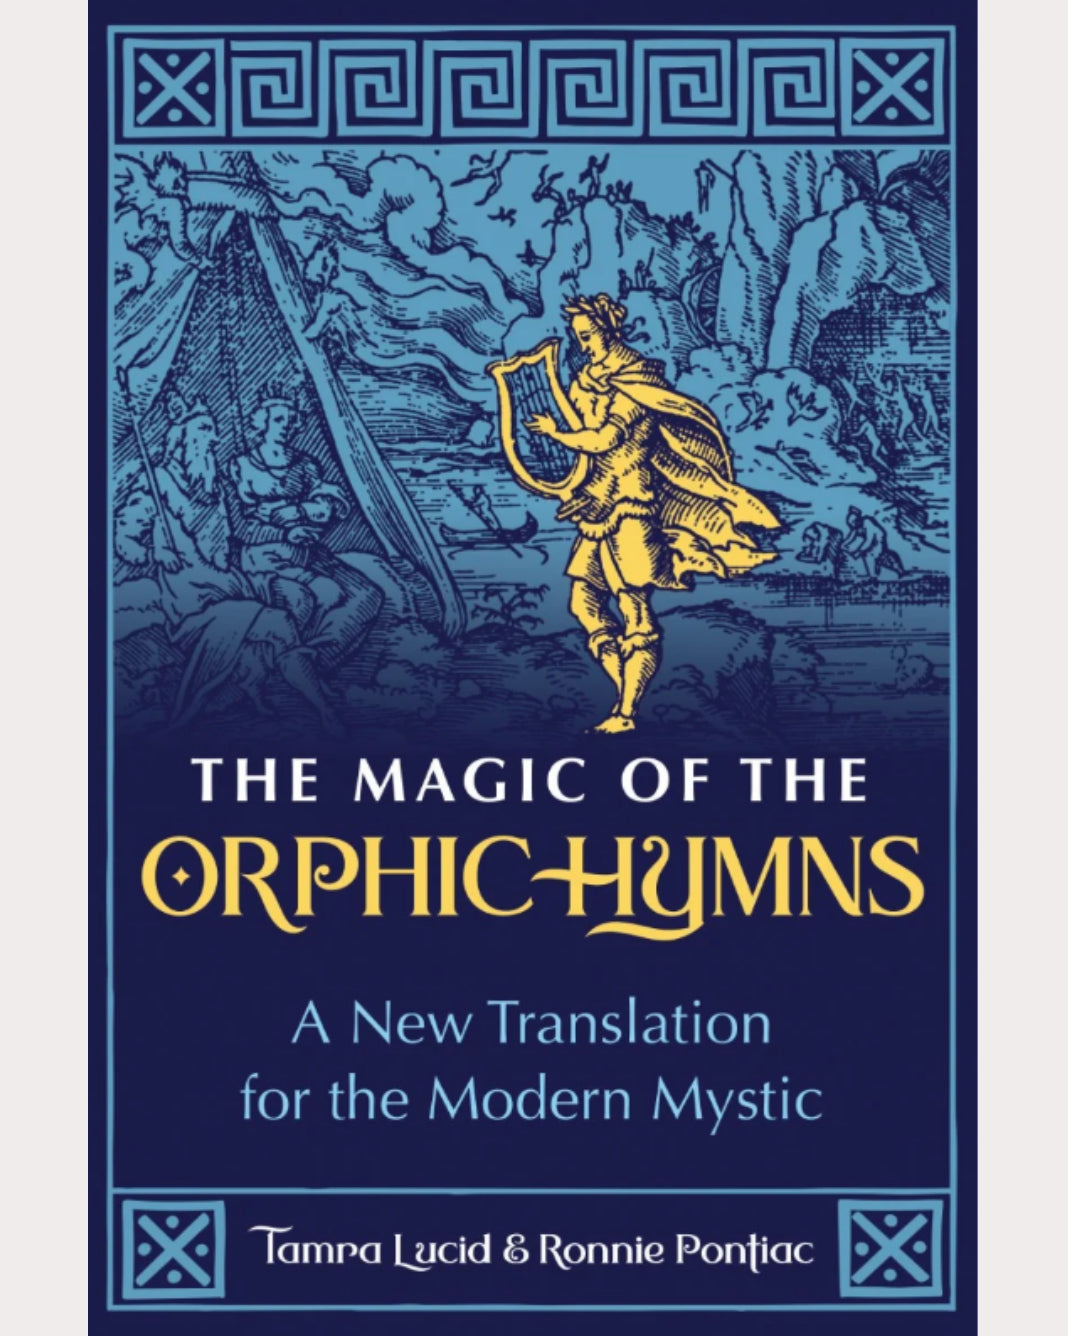 The Magic of the Orphic Hymns